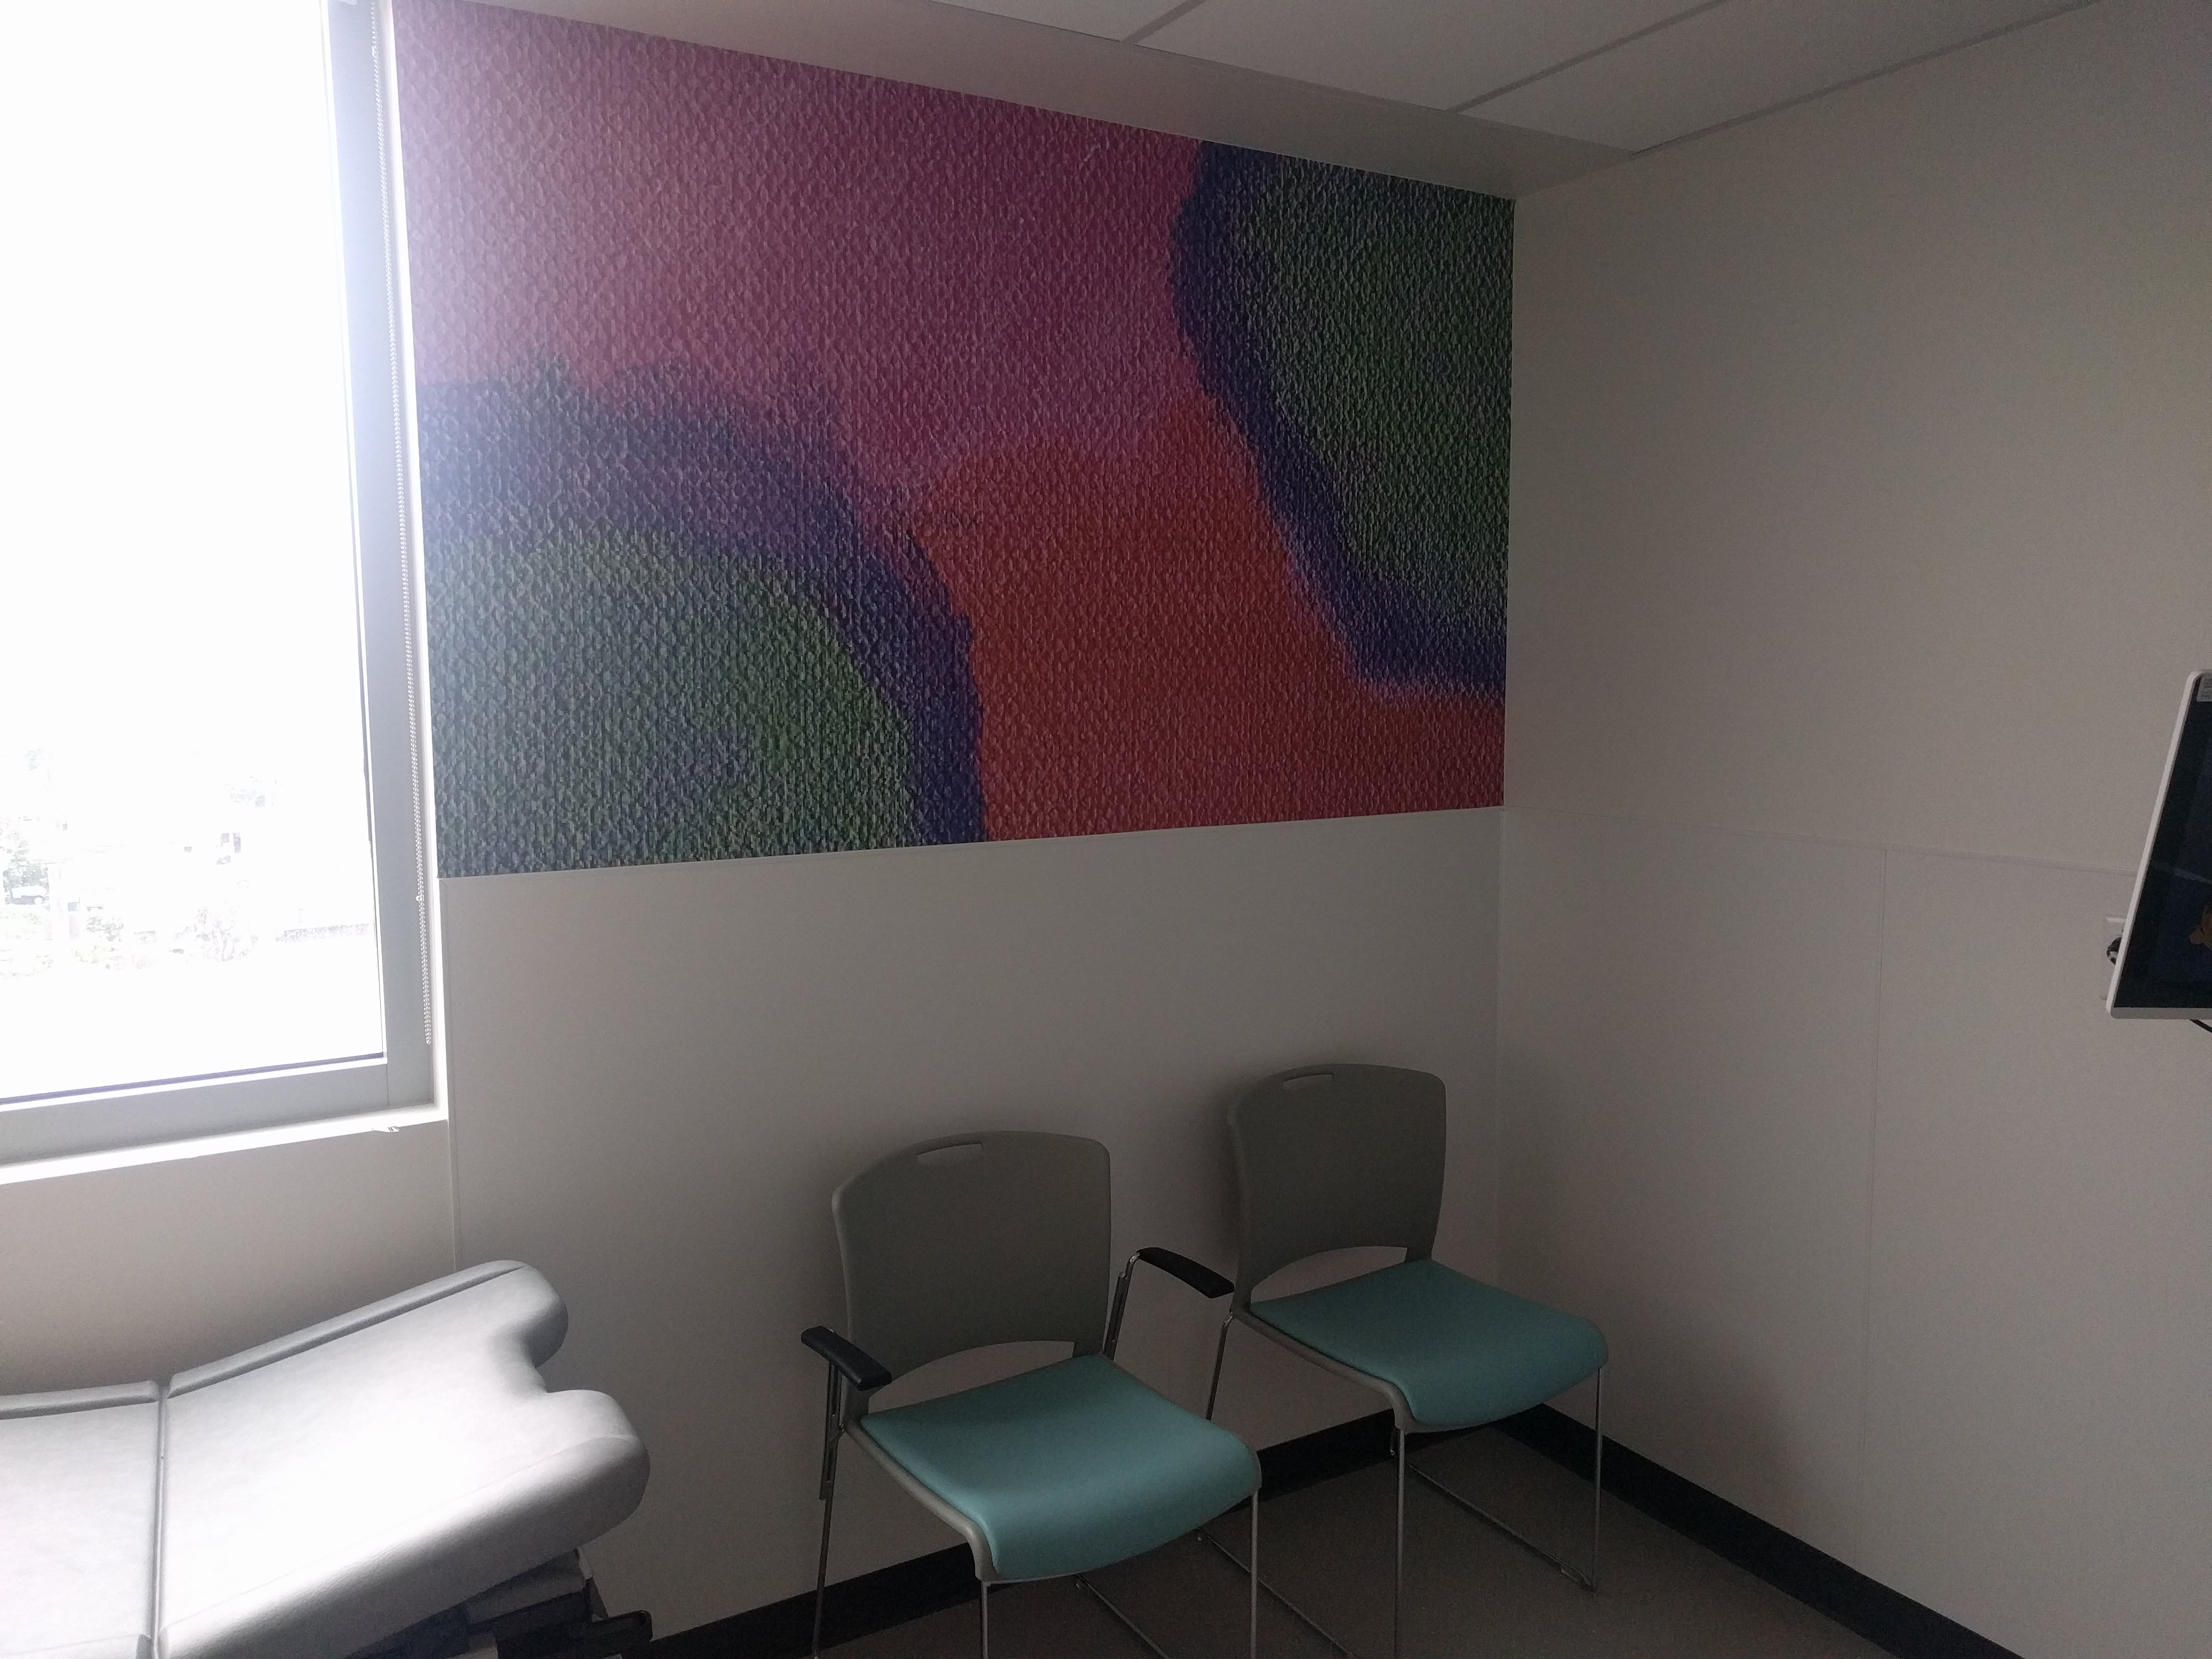 Patterned wall mural in hospital